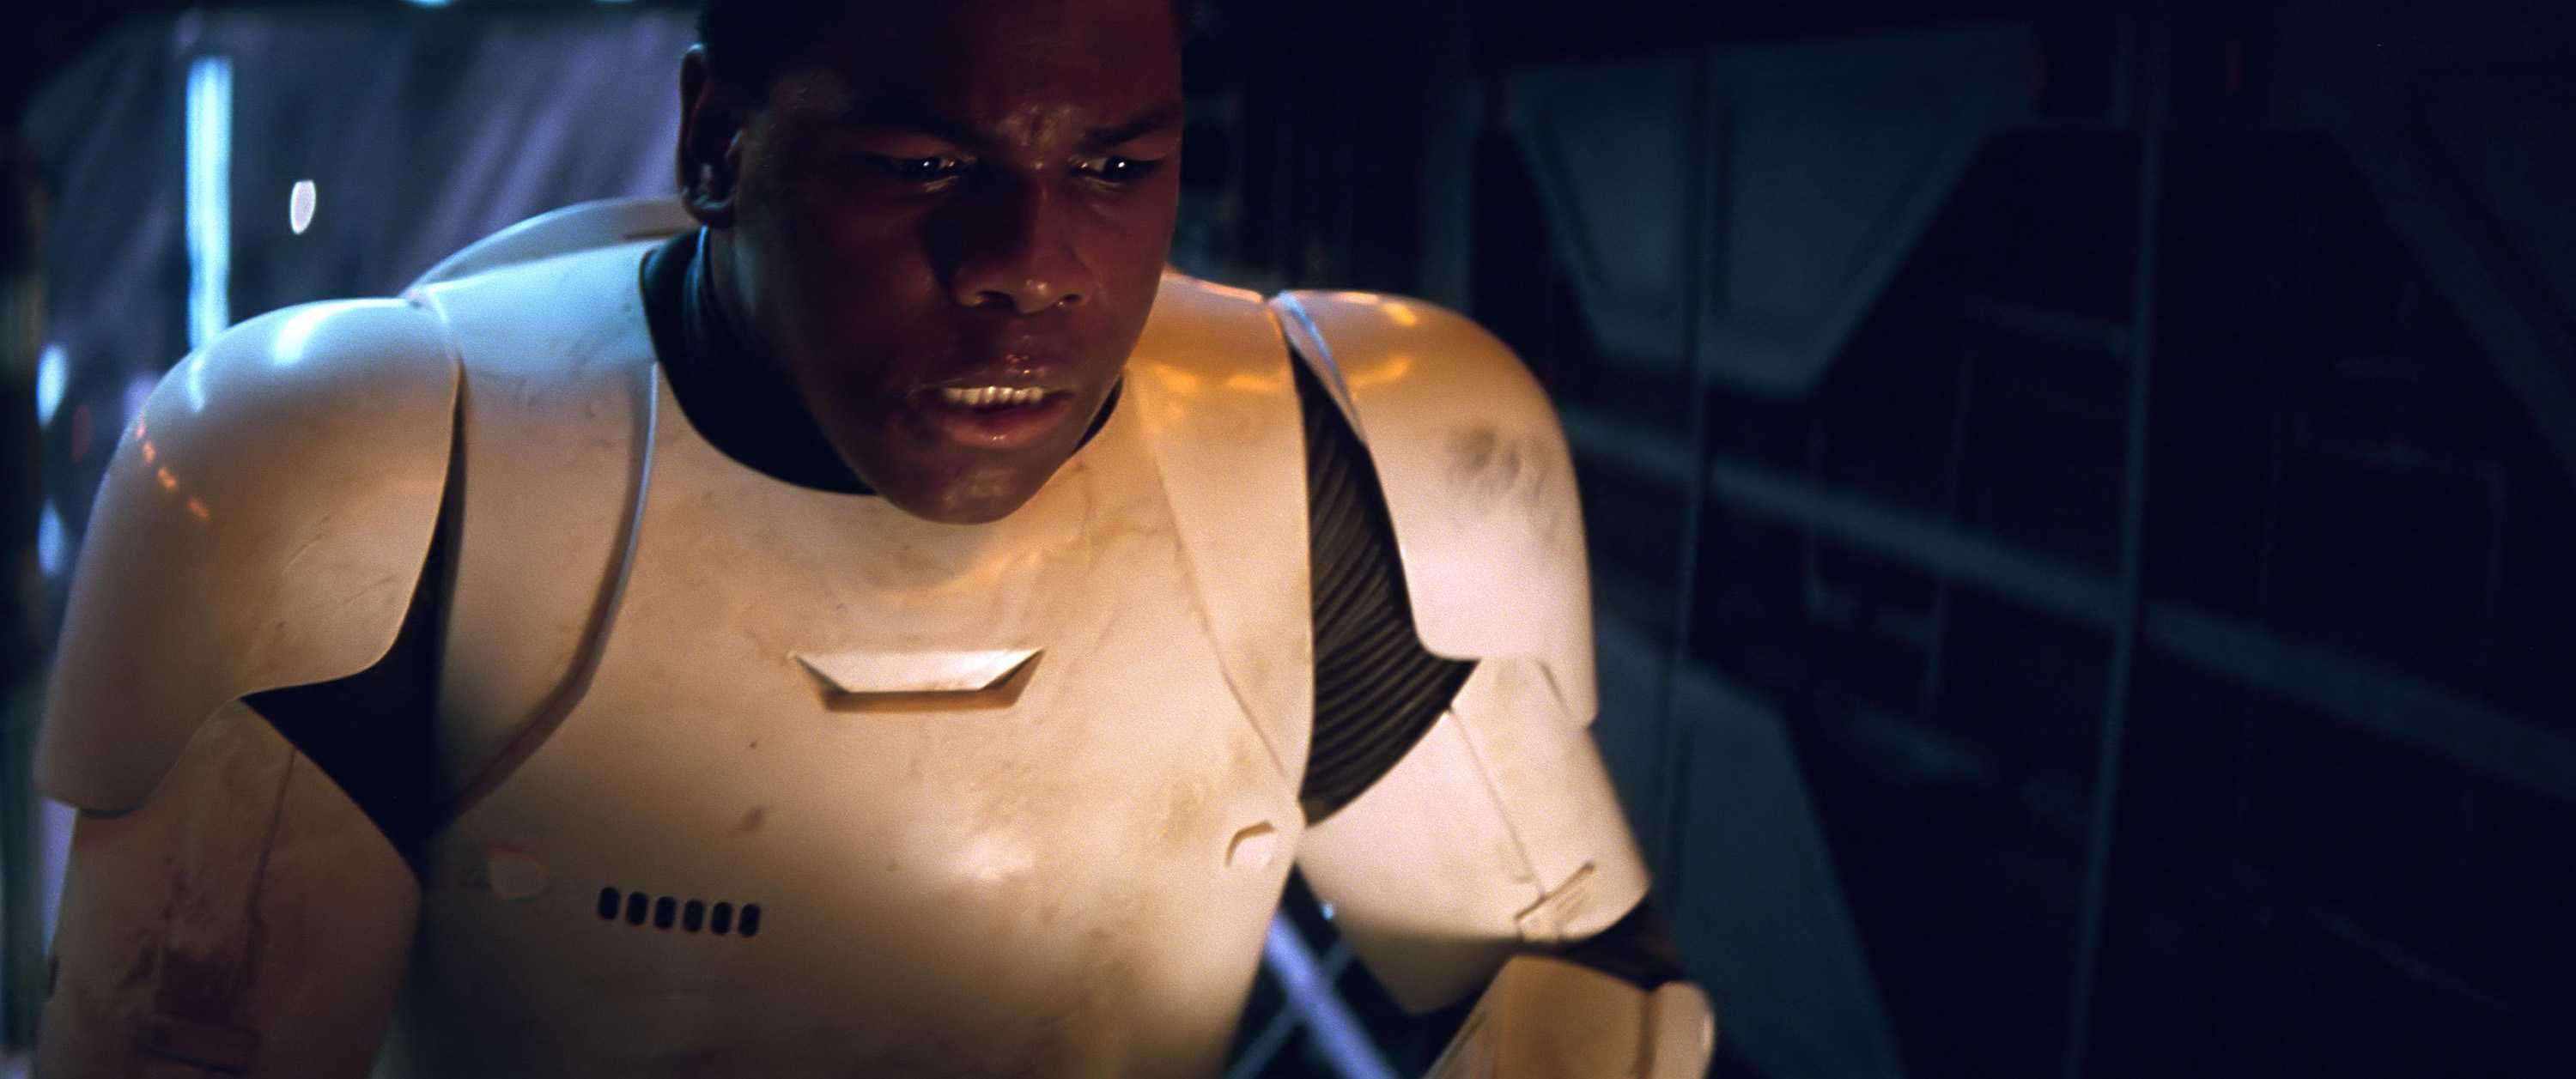 John Boyega in Star Wars dressed as a stormtrooper with his helment off. His mouth is slightly open, with a look of frustration.